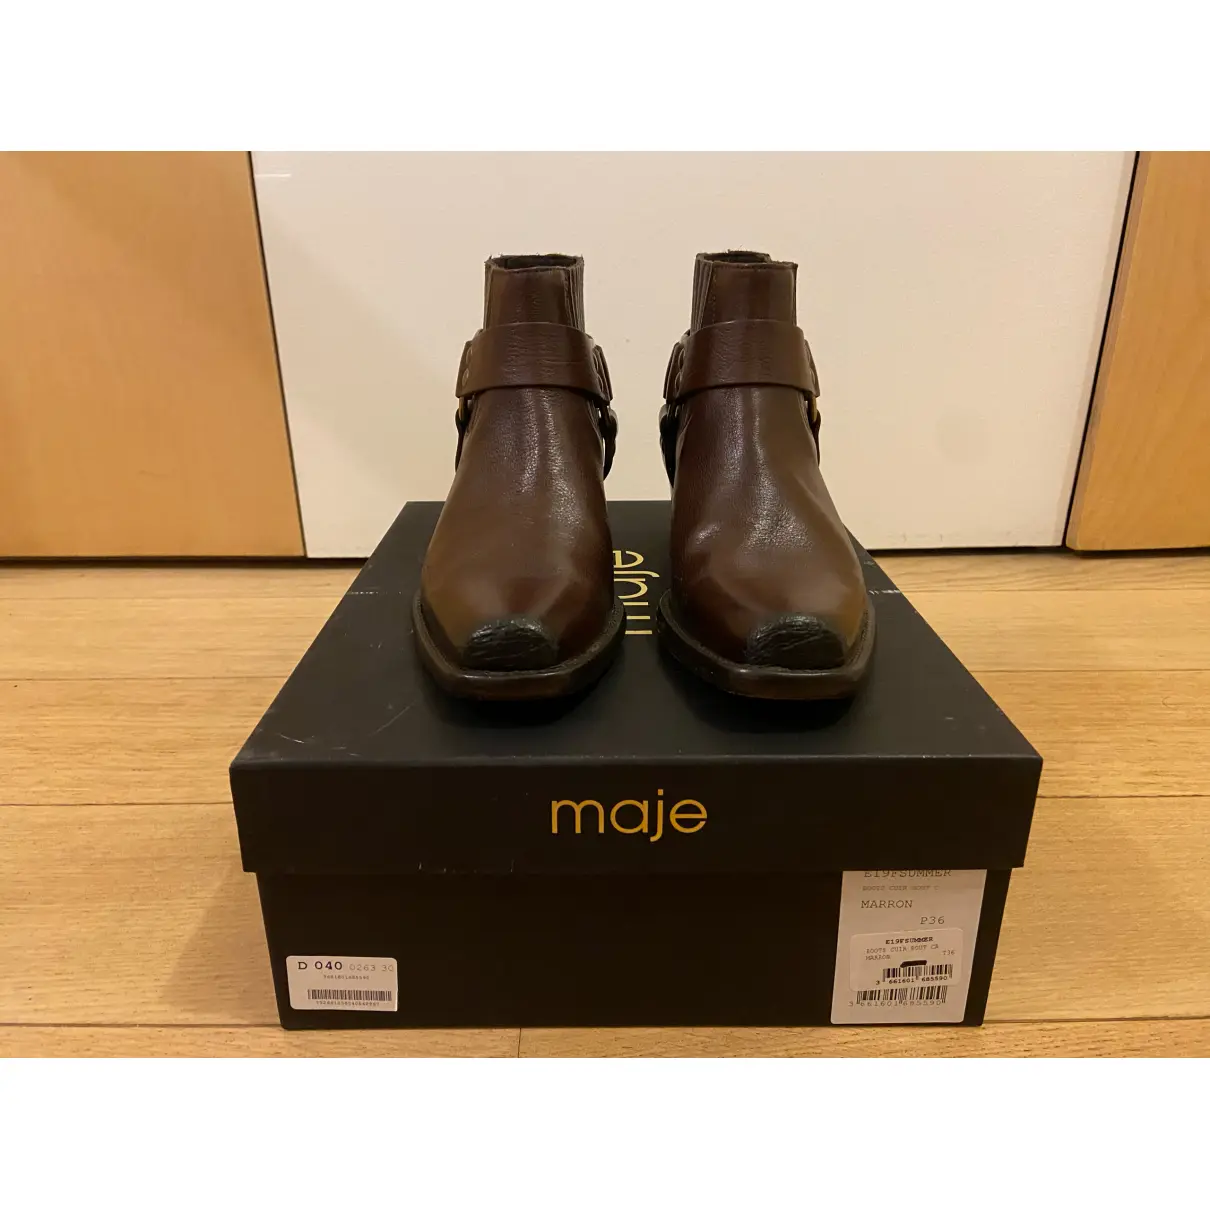 Buy Maje Spring Summer 2019 leather western boots online